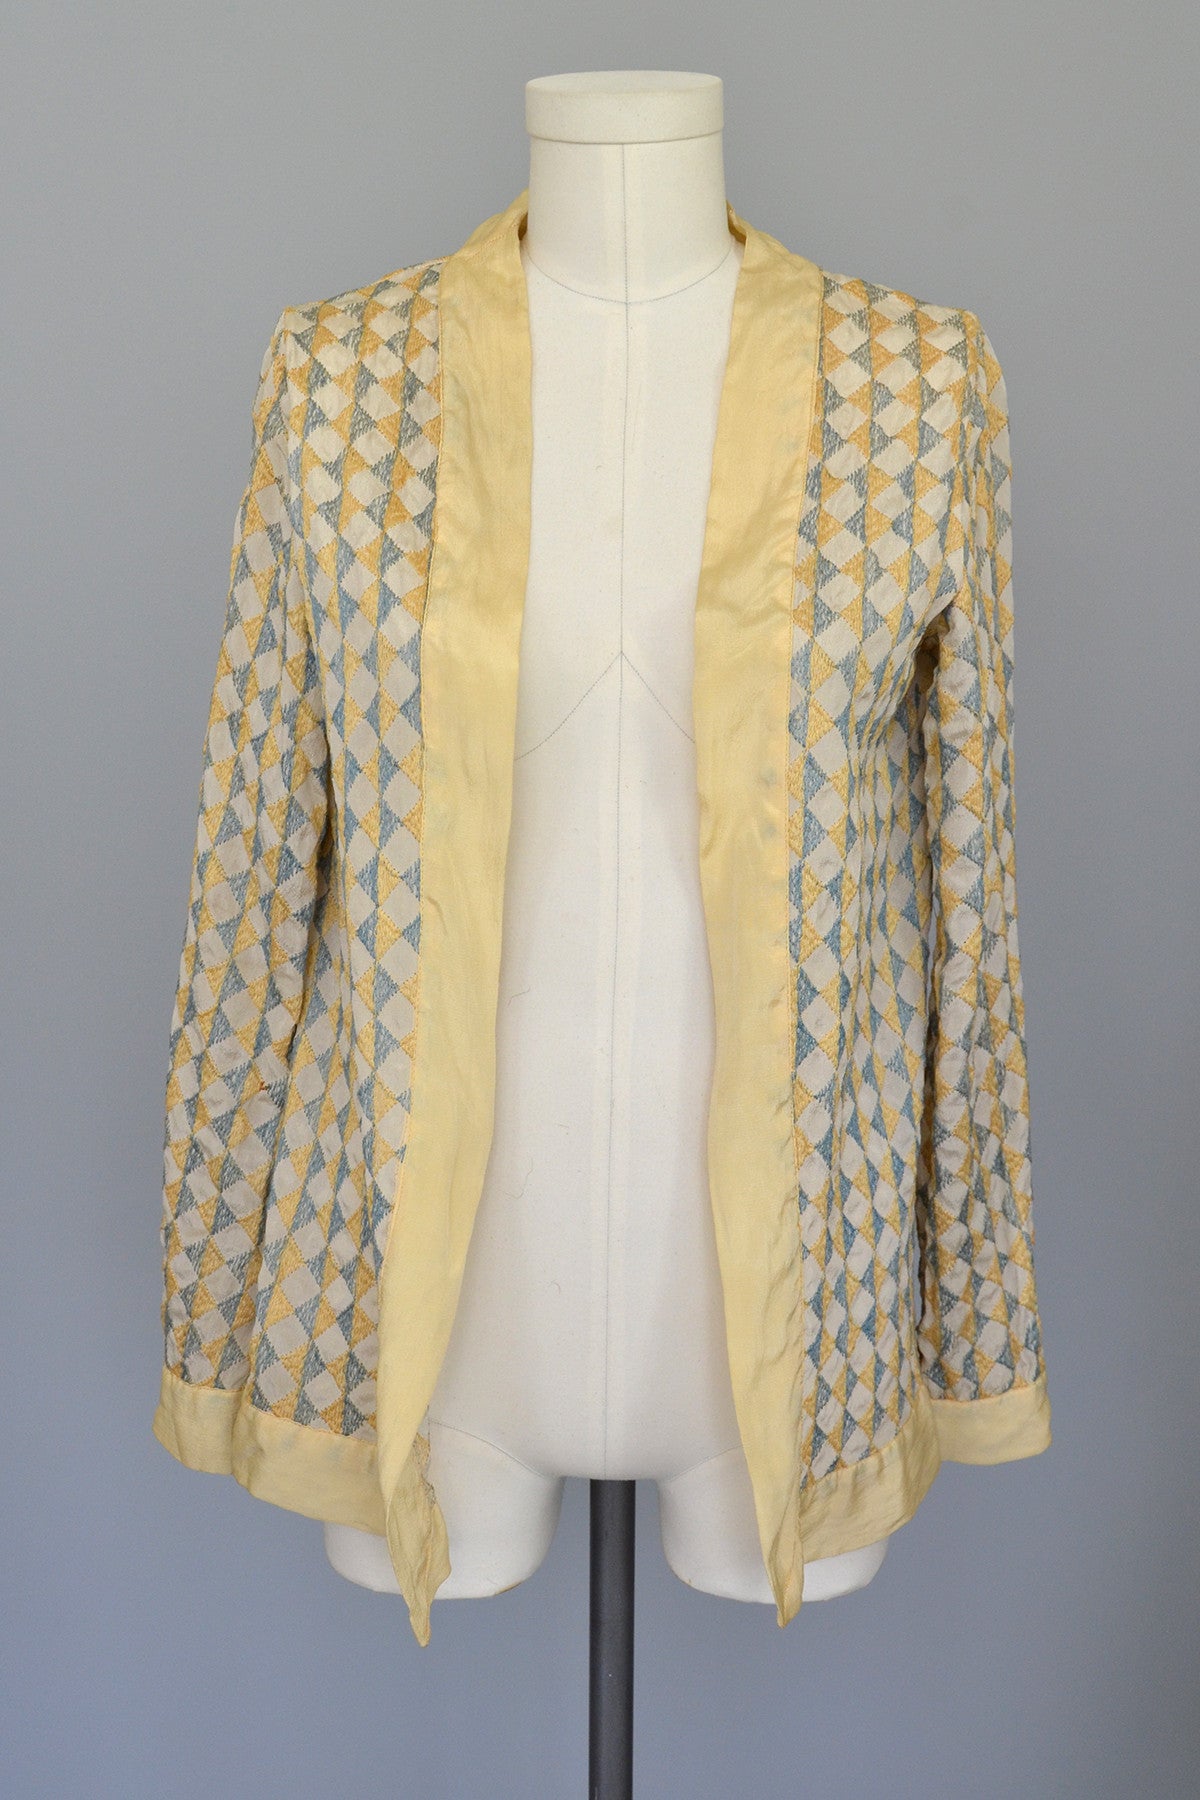 RESERVED 1920s Deco Harlequin Embroidered Jacket Duster